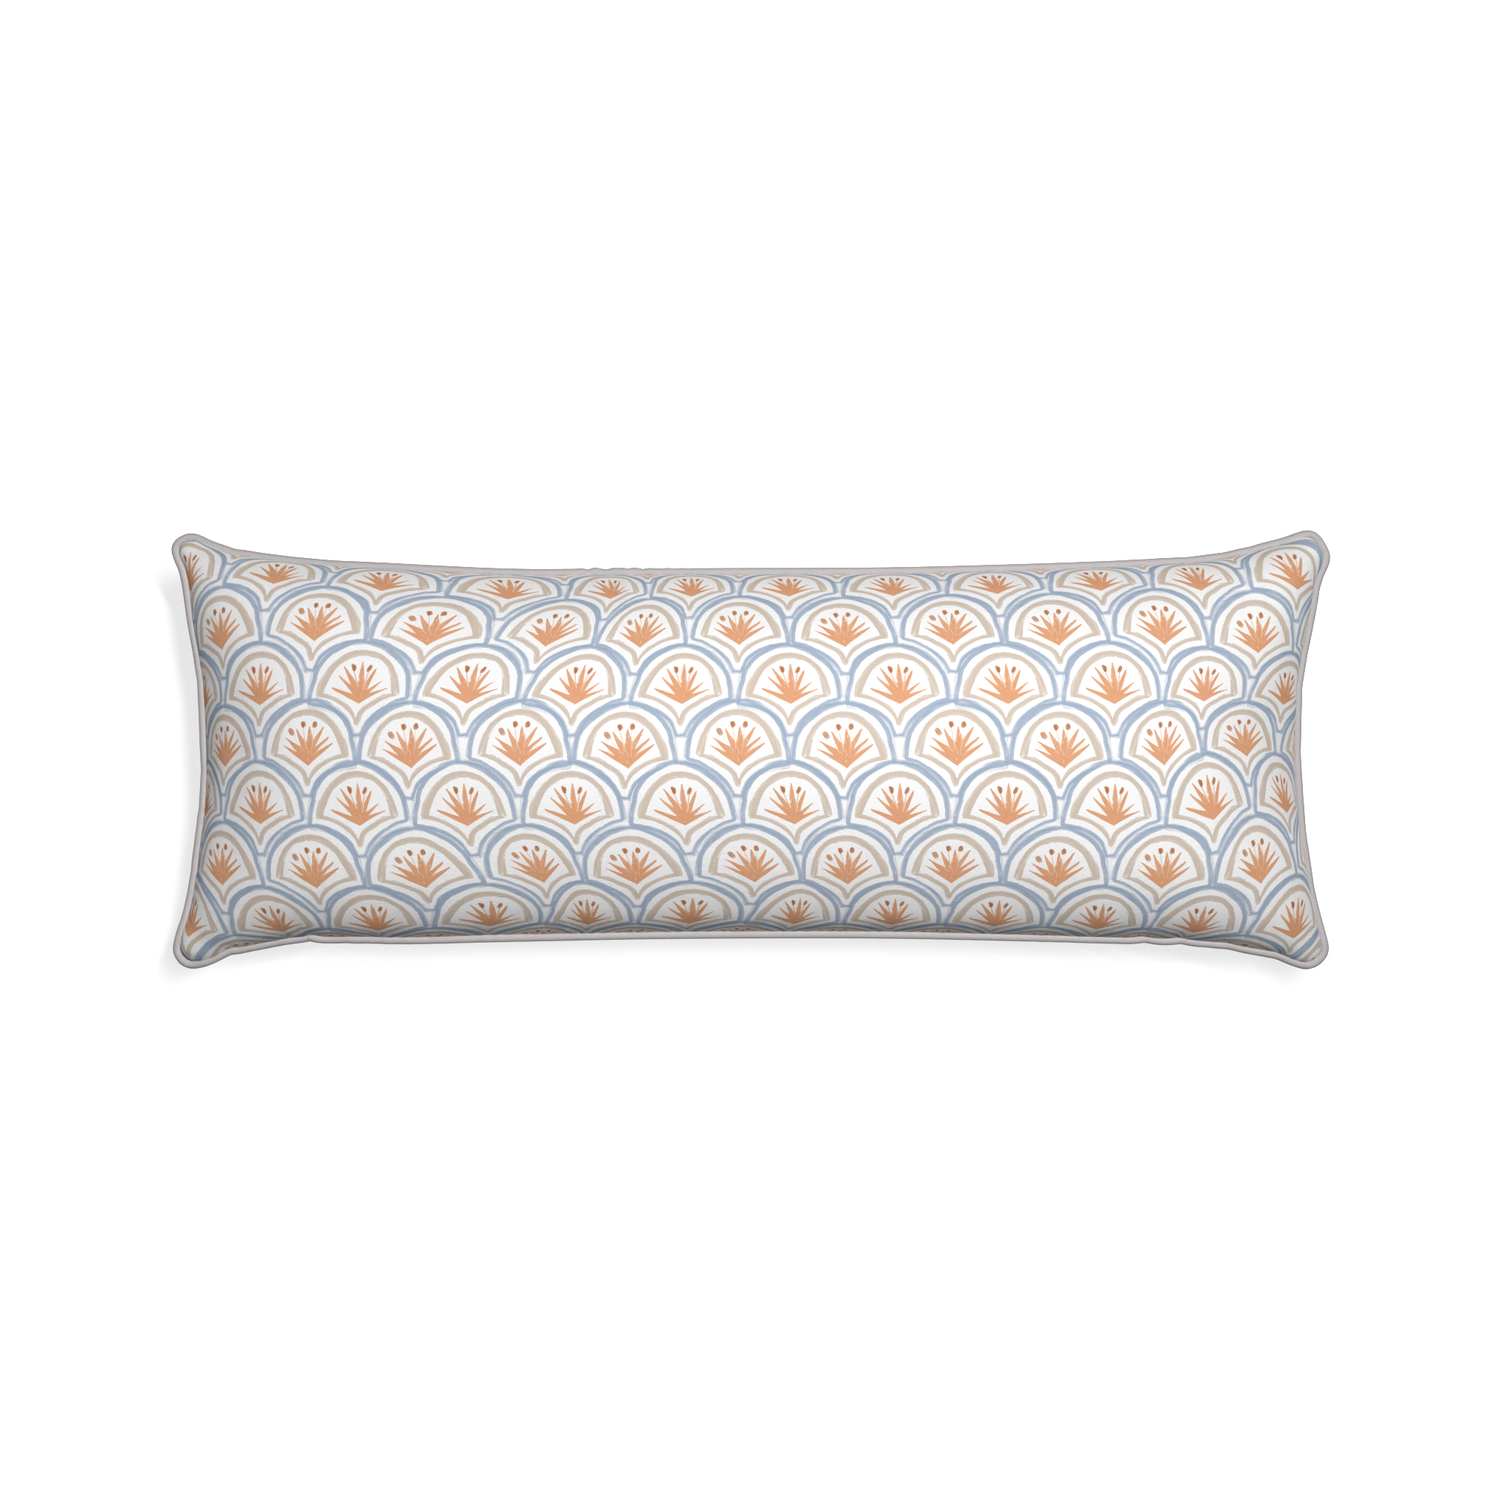 Xl-lumbar thatcher apricot custom pillow with pebble piping on white background